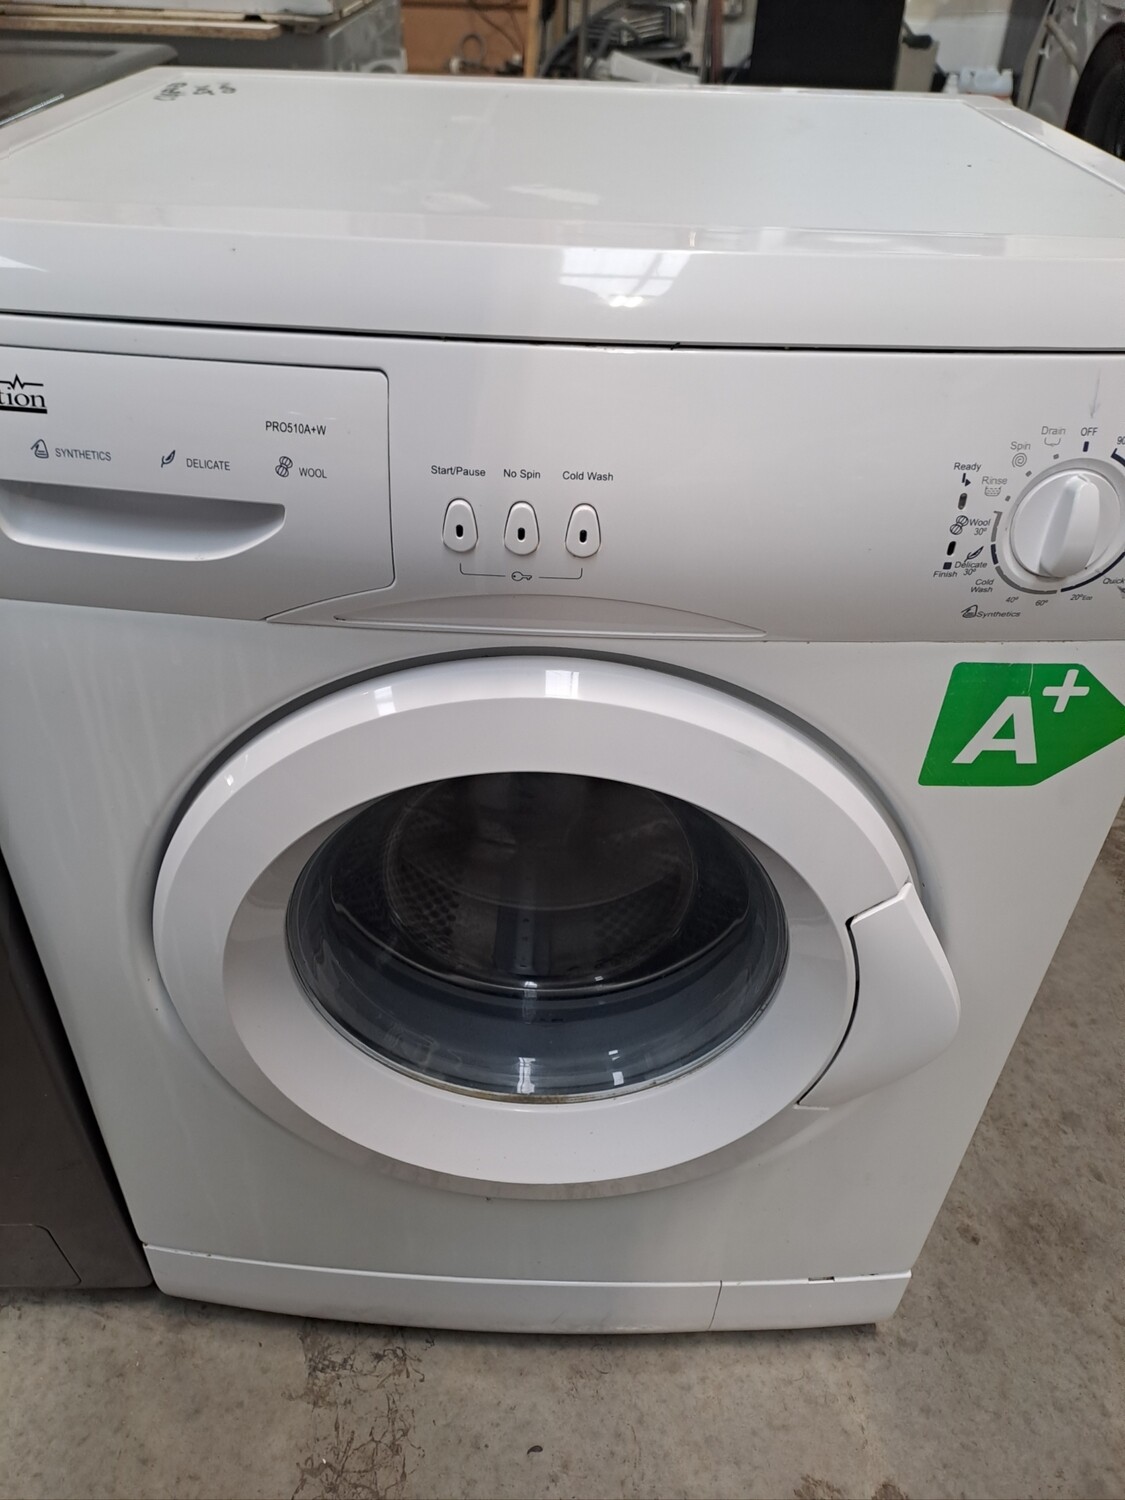 ProAction 5Kg Load 1000 Spin Washing Machine - White - Refurbished - 3 Month Guarantee. This item is located in our Whitby Road Shop 